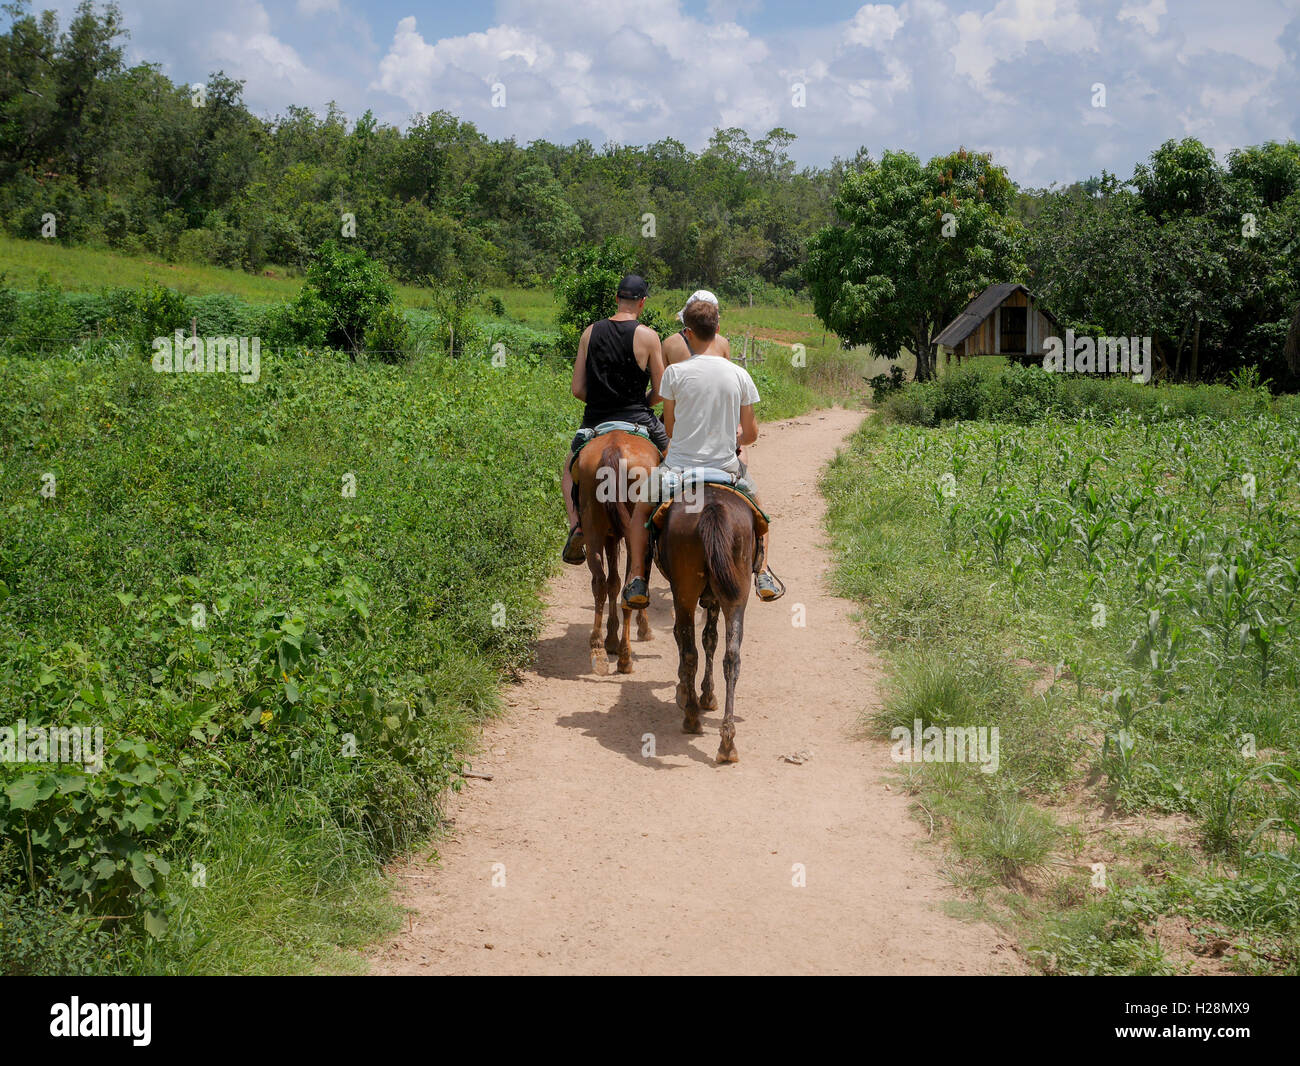 Men riding horses in a field Stock Photo